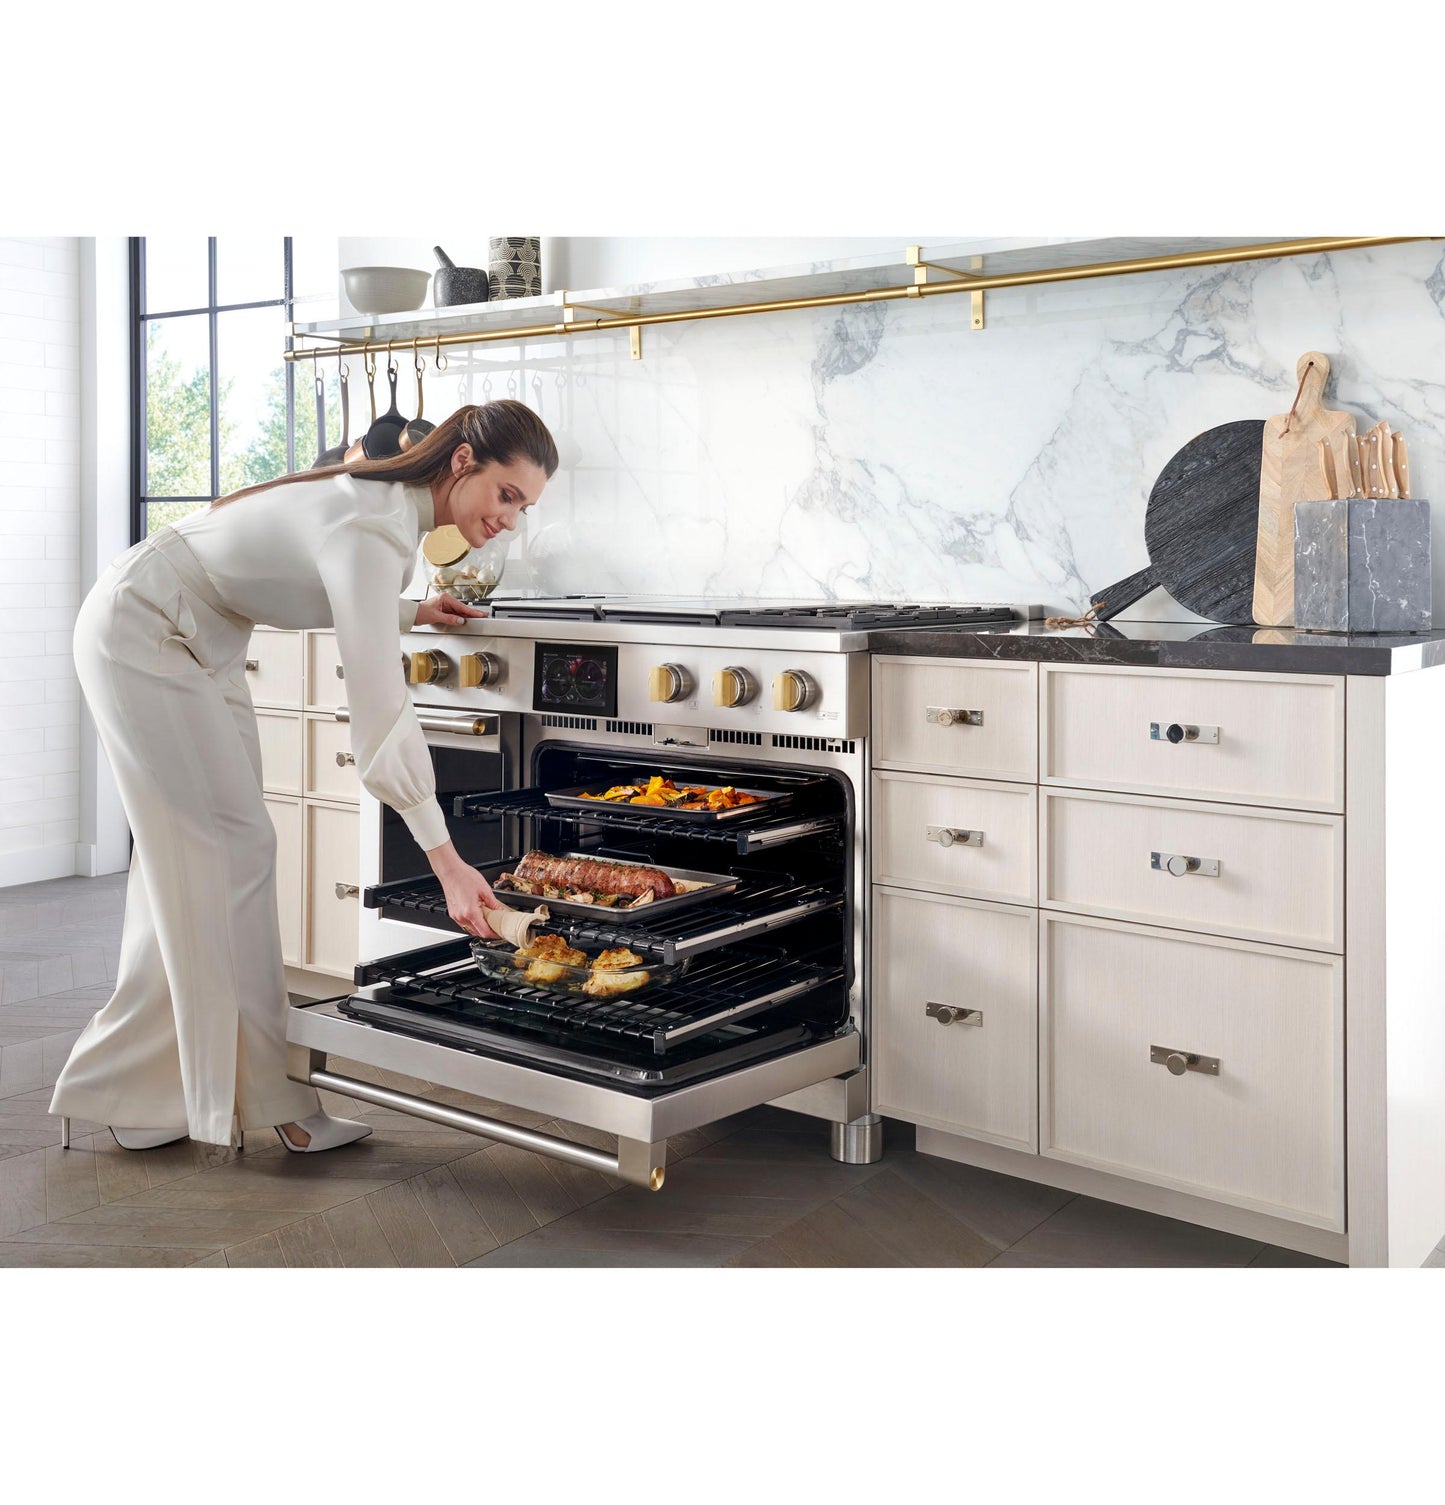 Monogram ZDP484NGTSS Monogram 48" Dual-Fuel Professional Range With 4 Burners, Grill, And Griddle